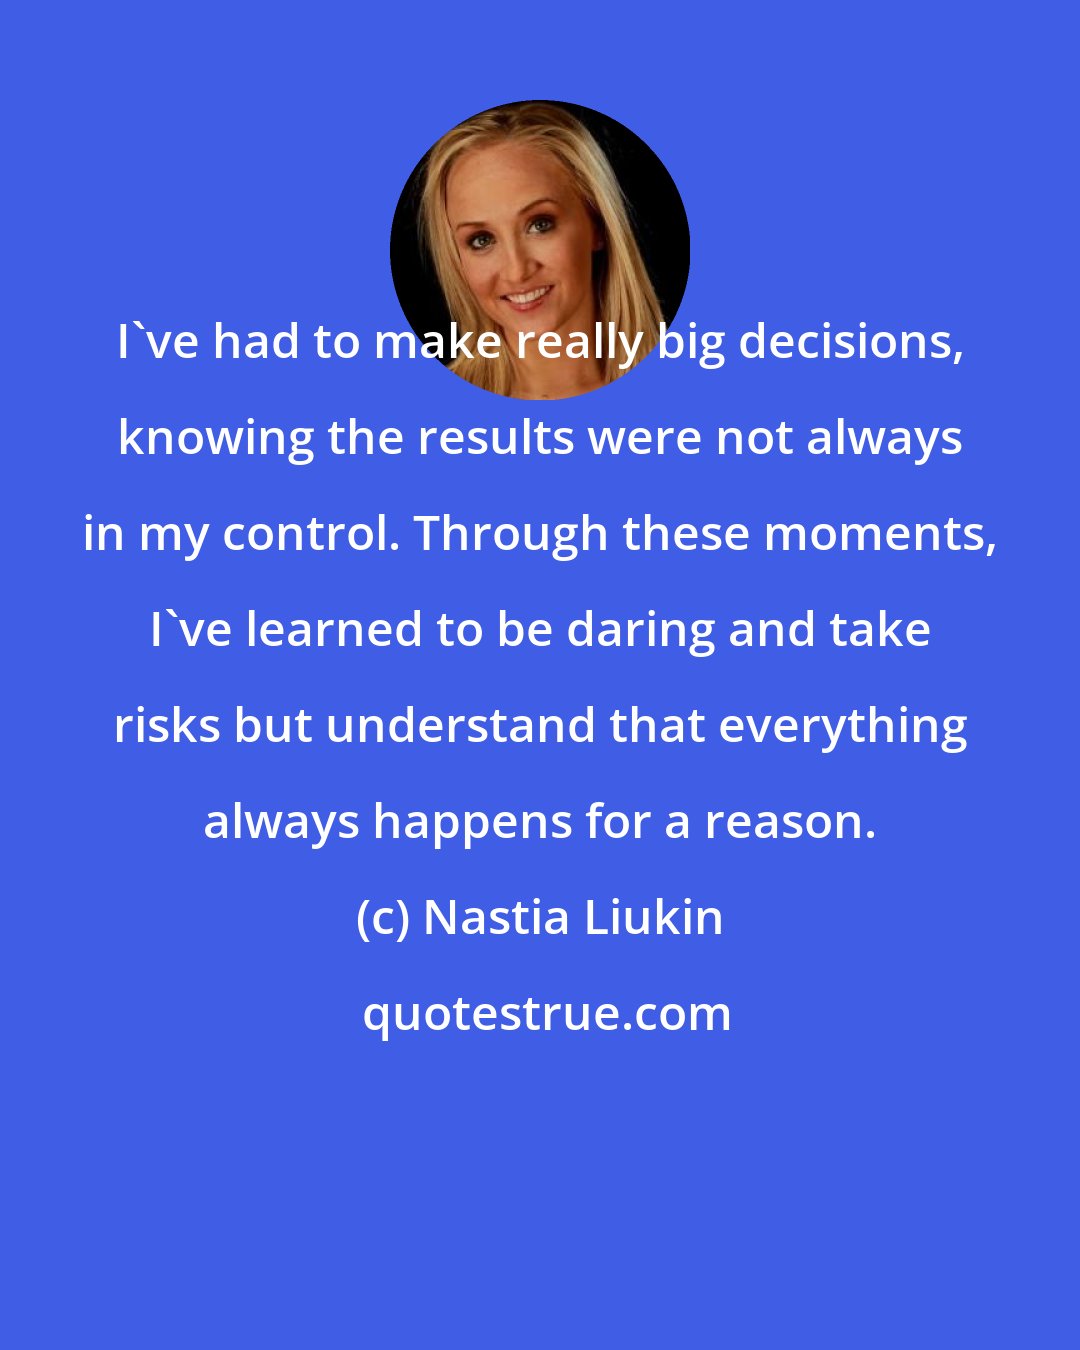 Nastia Liukin: I've had to make really big decisions, knowing the results were not always in my control. Through these moments, I've learned to be daring and take risks but understand that everything always happens for a reason.